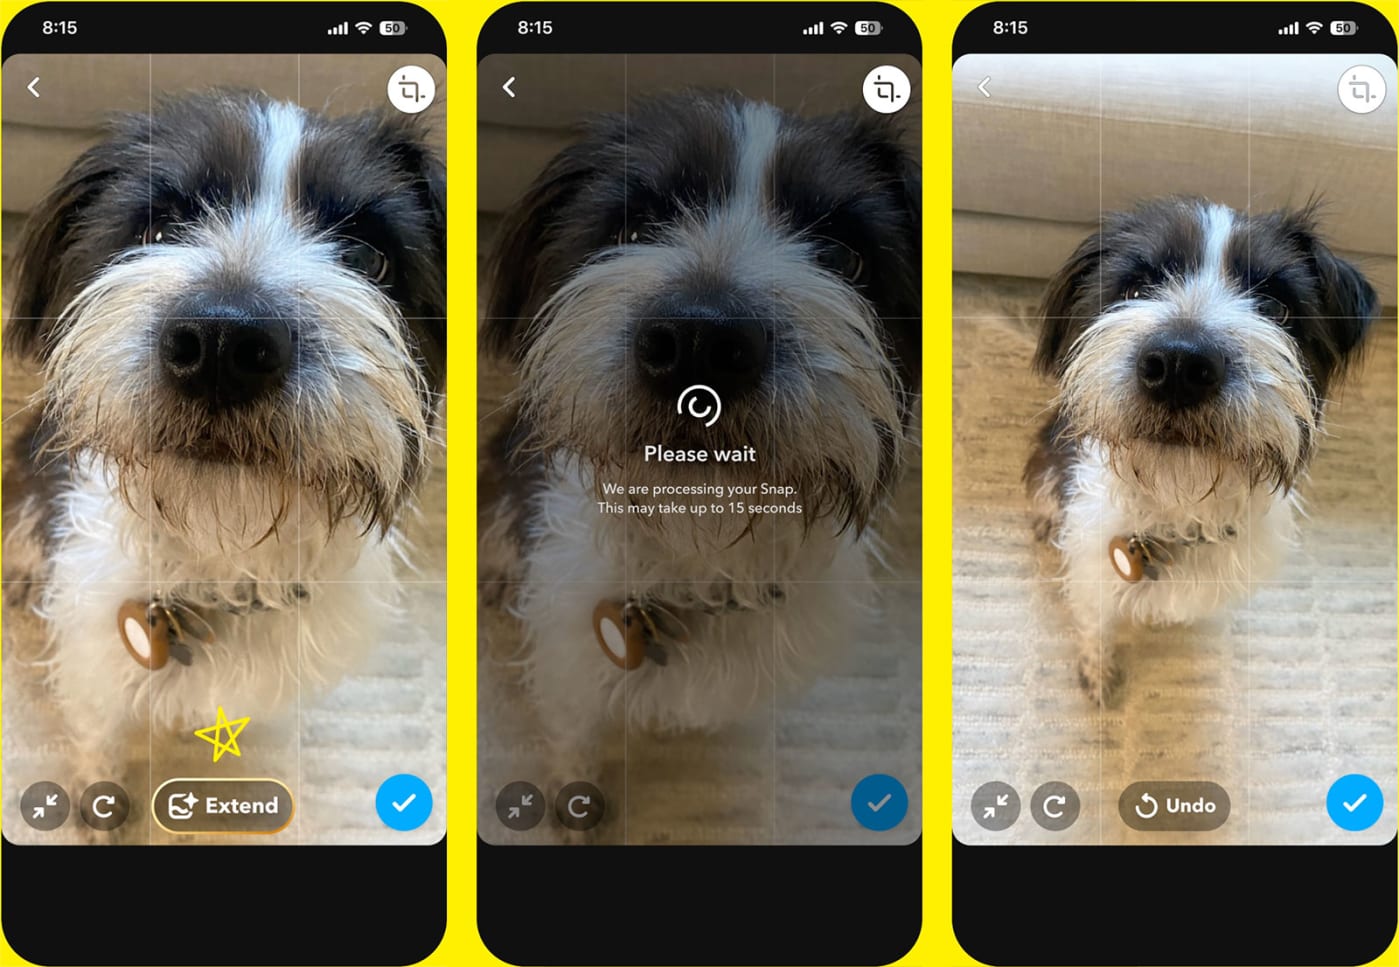 Snapchat+ subscribers can now use AI to generate or extend images within the app